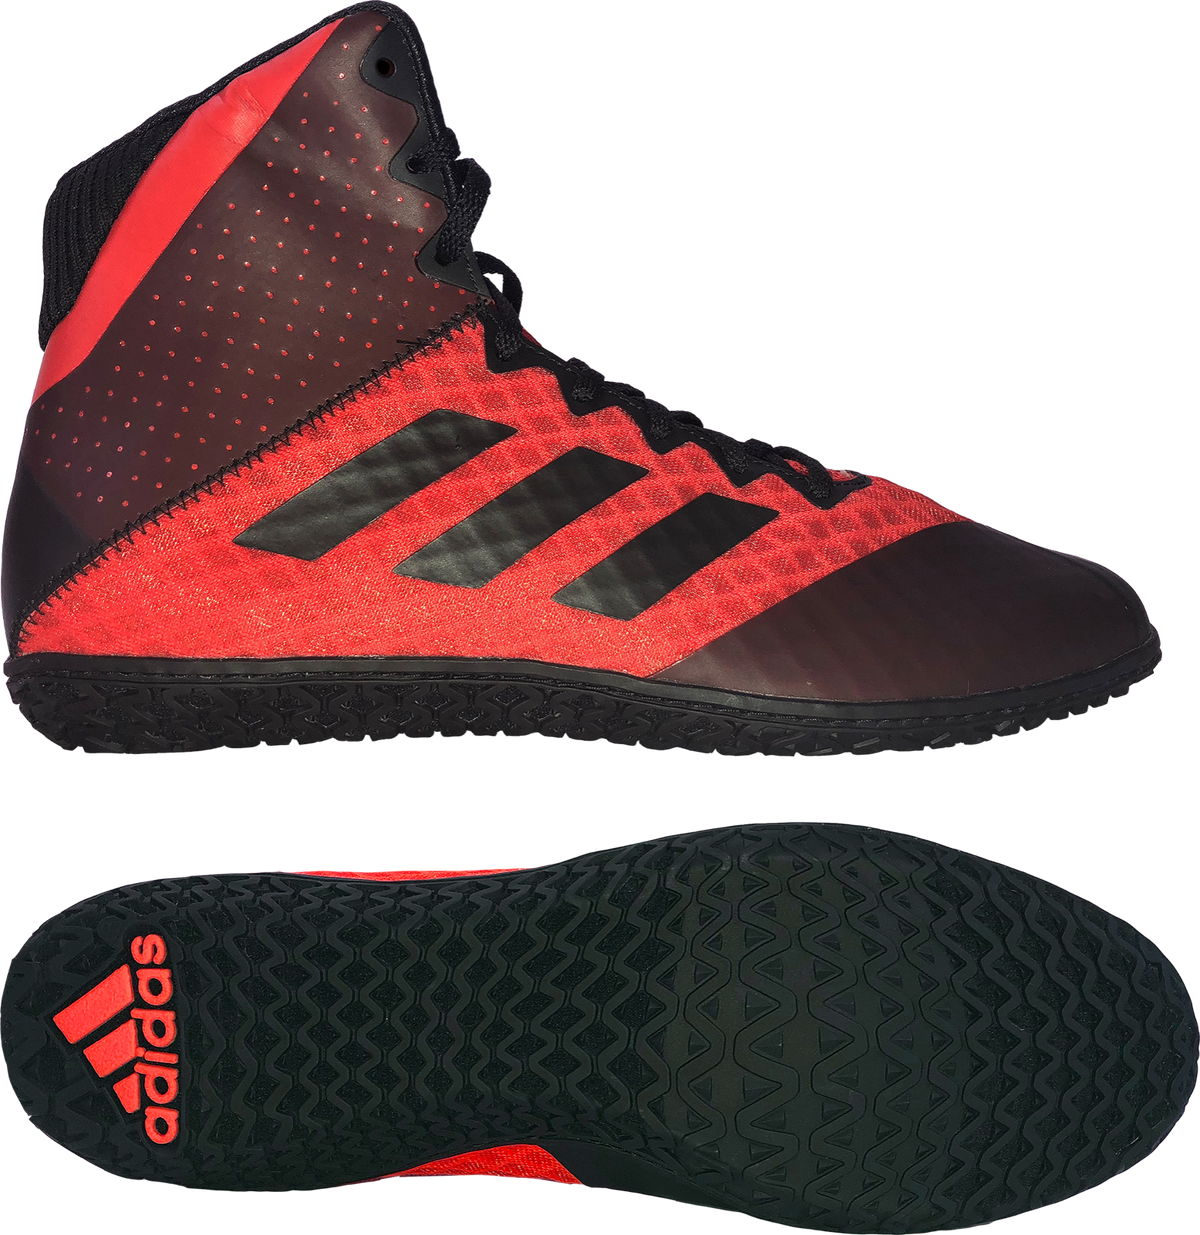 Adidas red and black wrestling shoes for high school